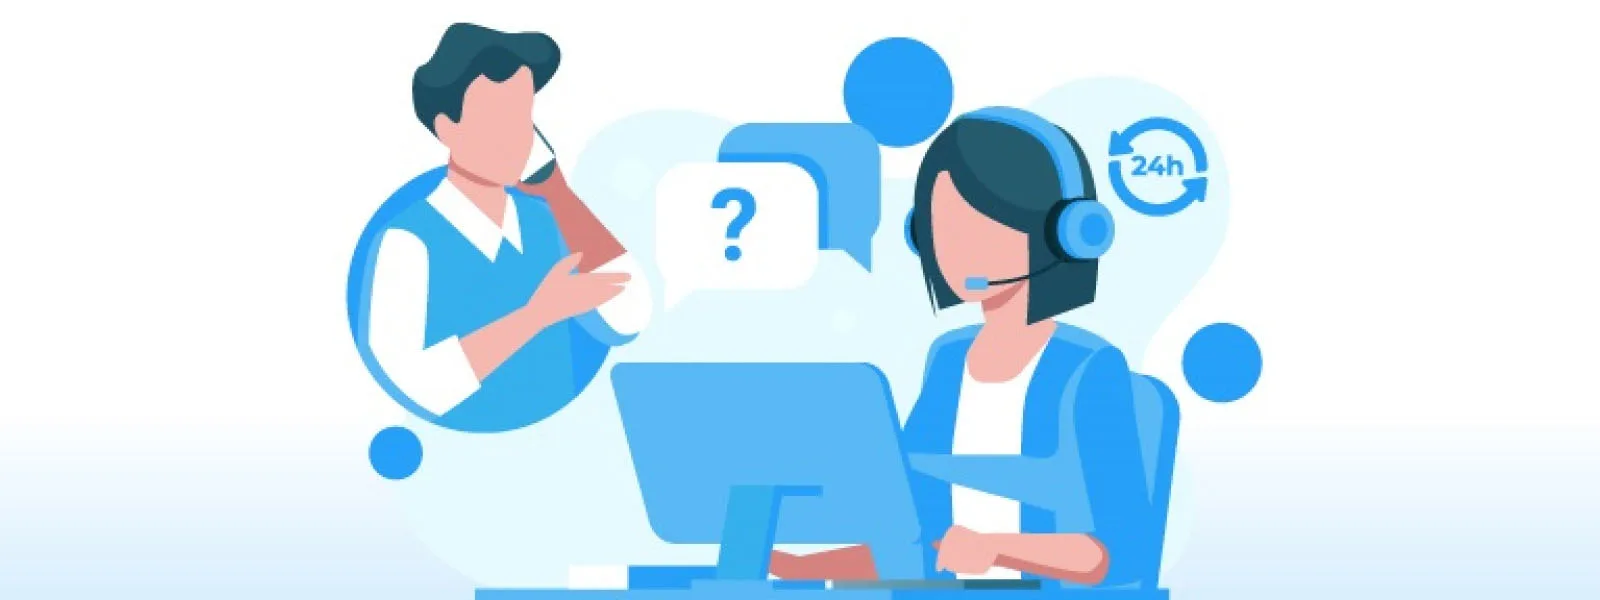 customer support types and importance